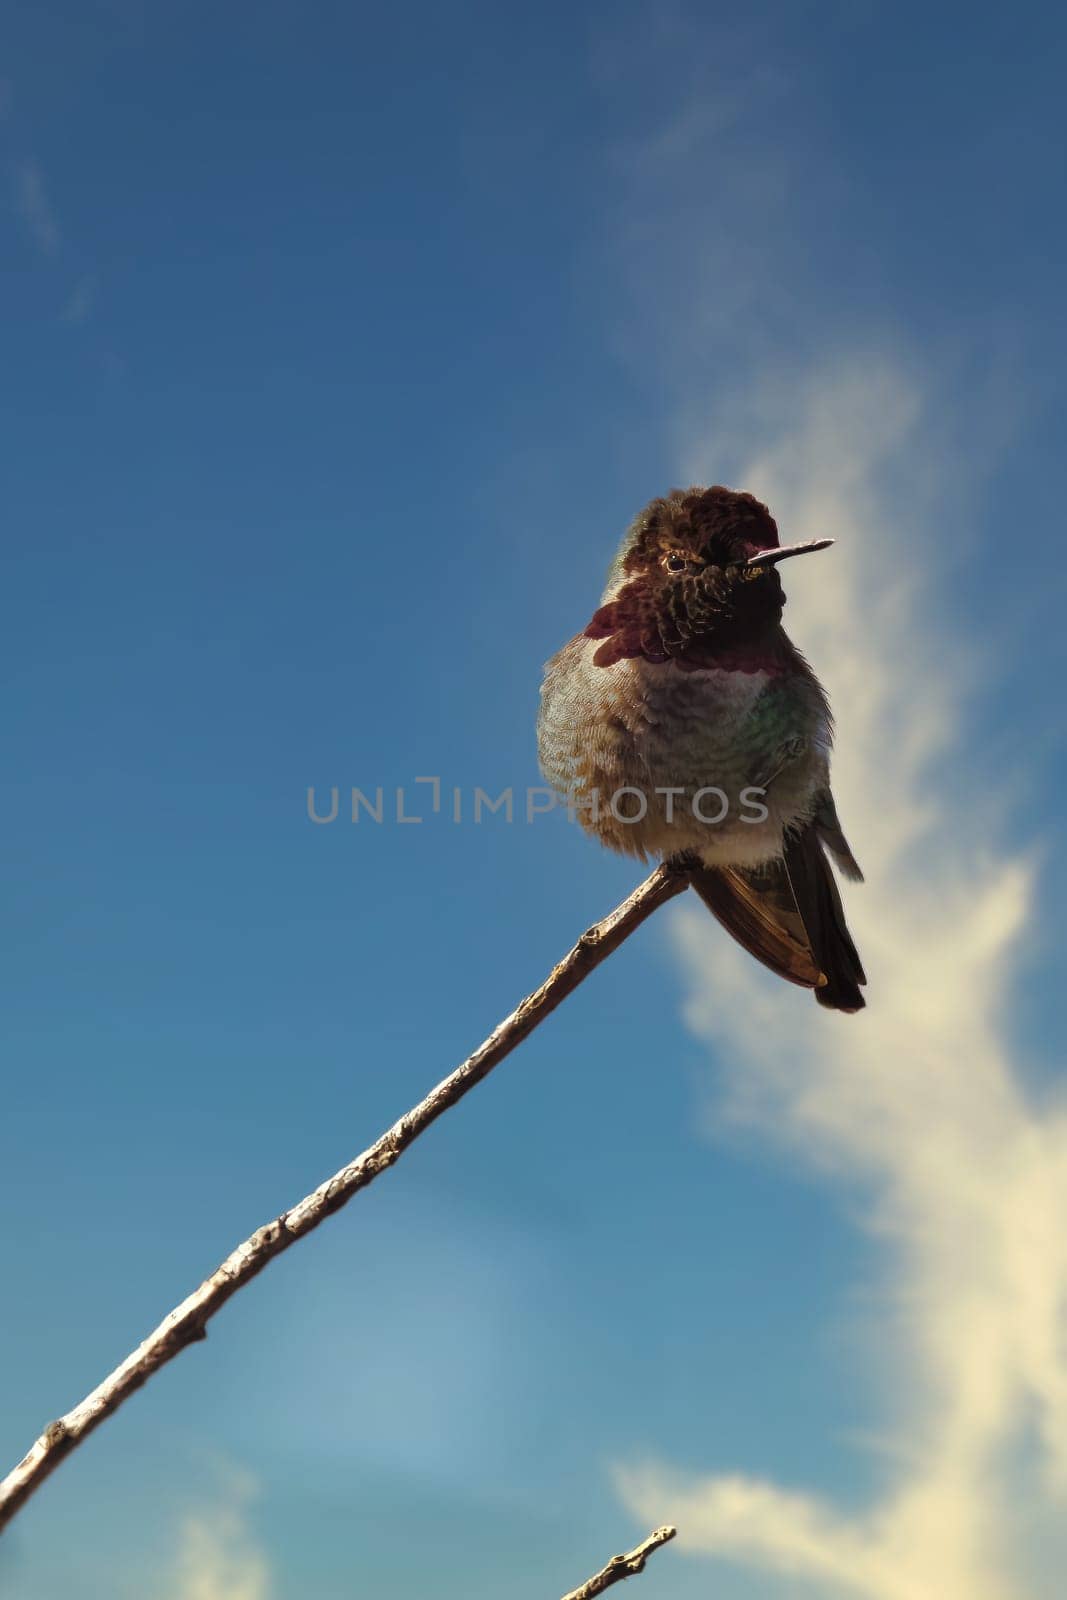 Capture the magic of an Anna Hummingbird (Calypte anna) in this vivid photograph taken in San Francisco. Known for their radiant, iridescent feathers and dynamic flight, this snapshot wonderfully showcases the bird's unique appeal. The hummingbird's enchanting beauty is highlighted against the backdrop of San Francisco bustling urban landscape.